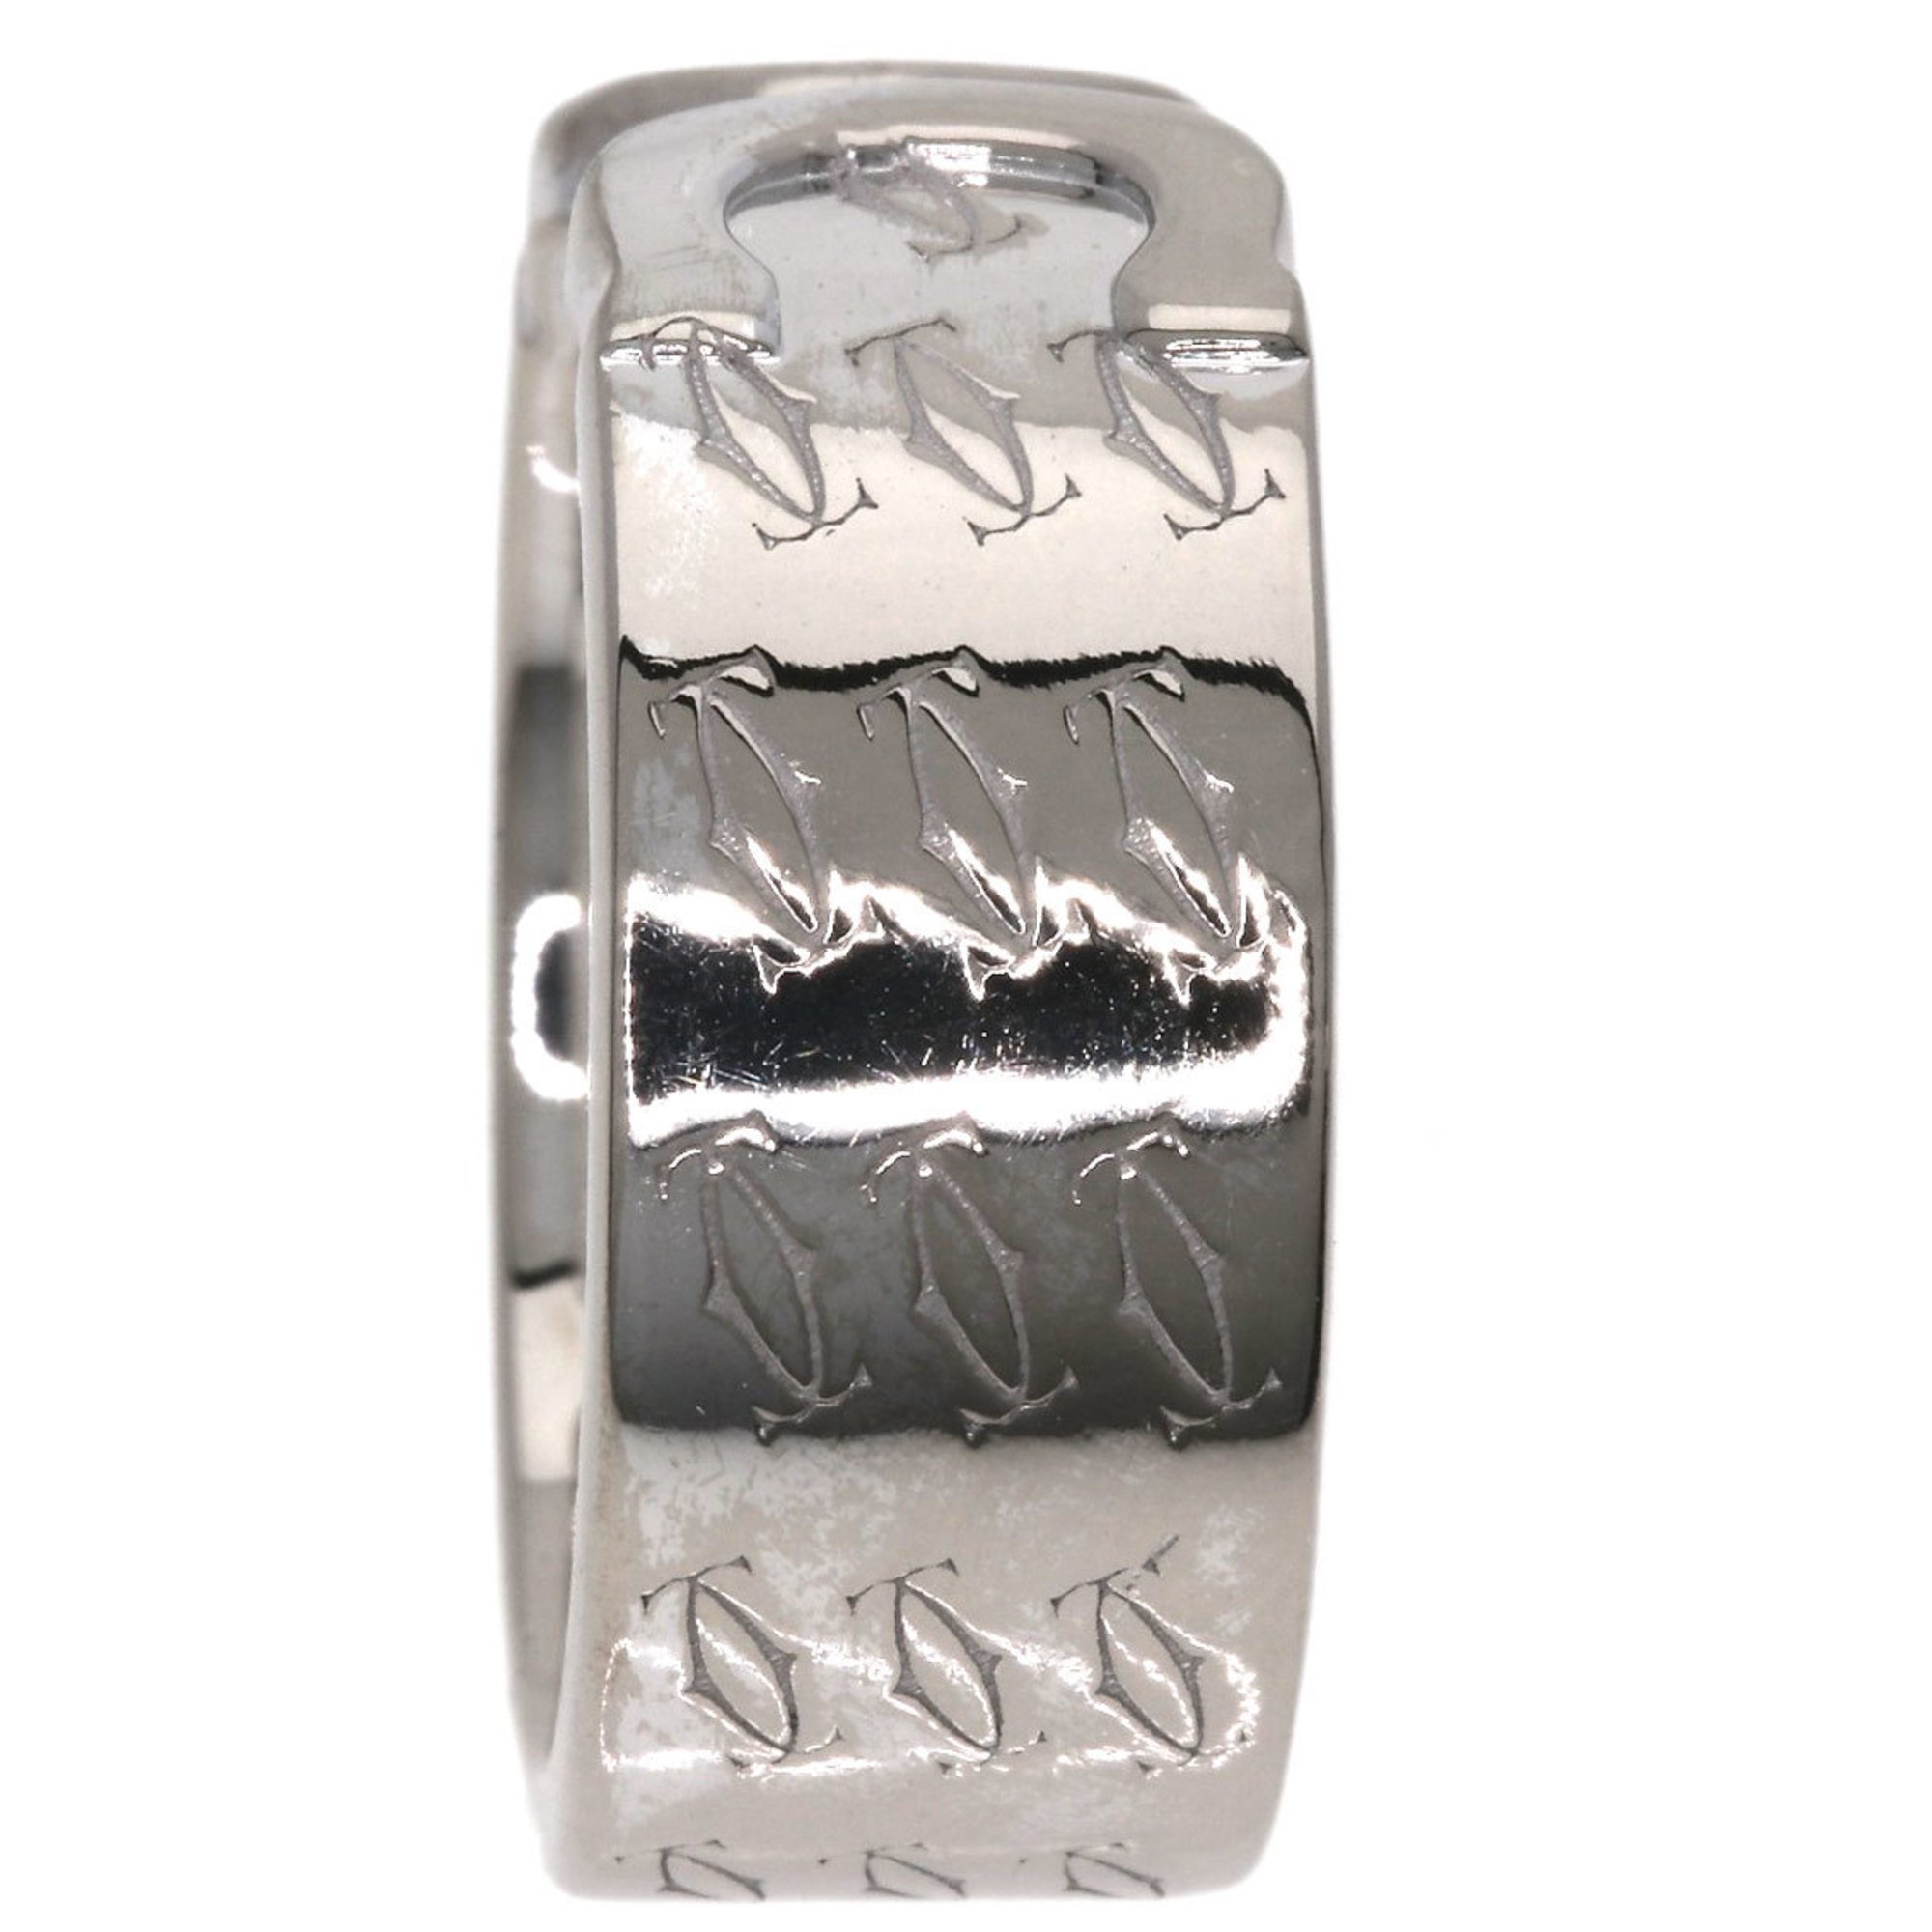 Cartier 2C Ring 2000 Limited Edition #51 K18 White Gold Women's CARTIER